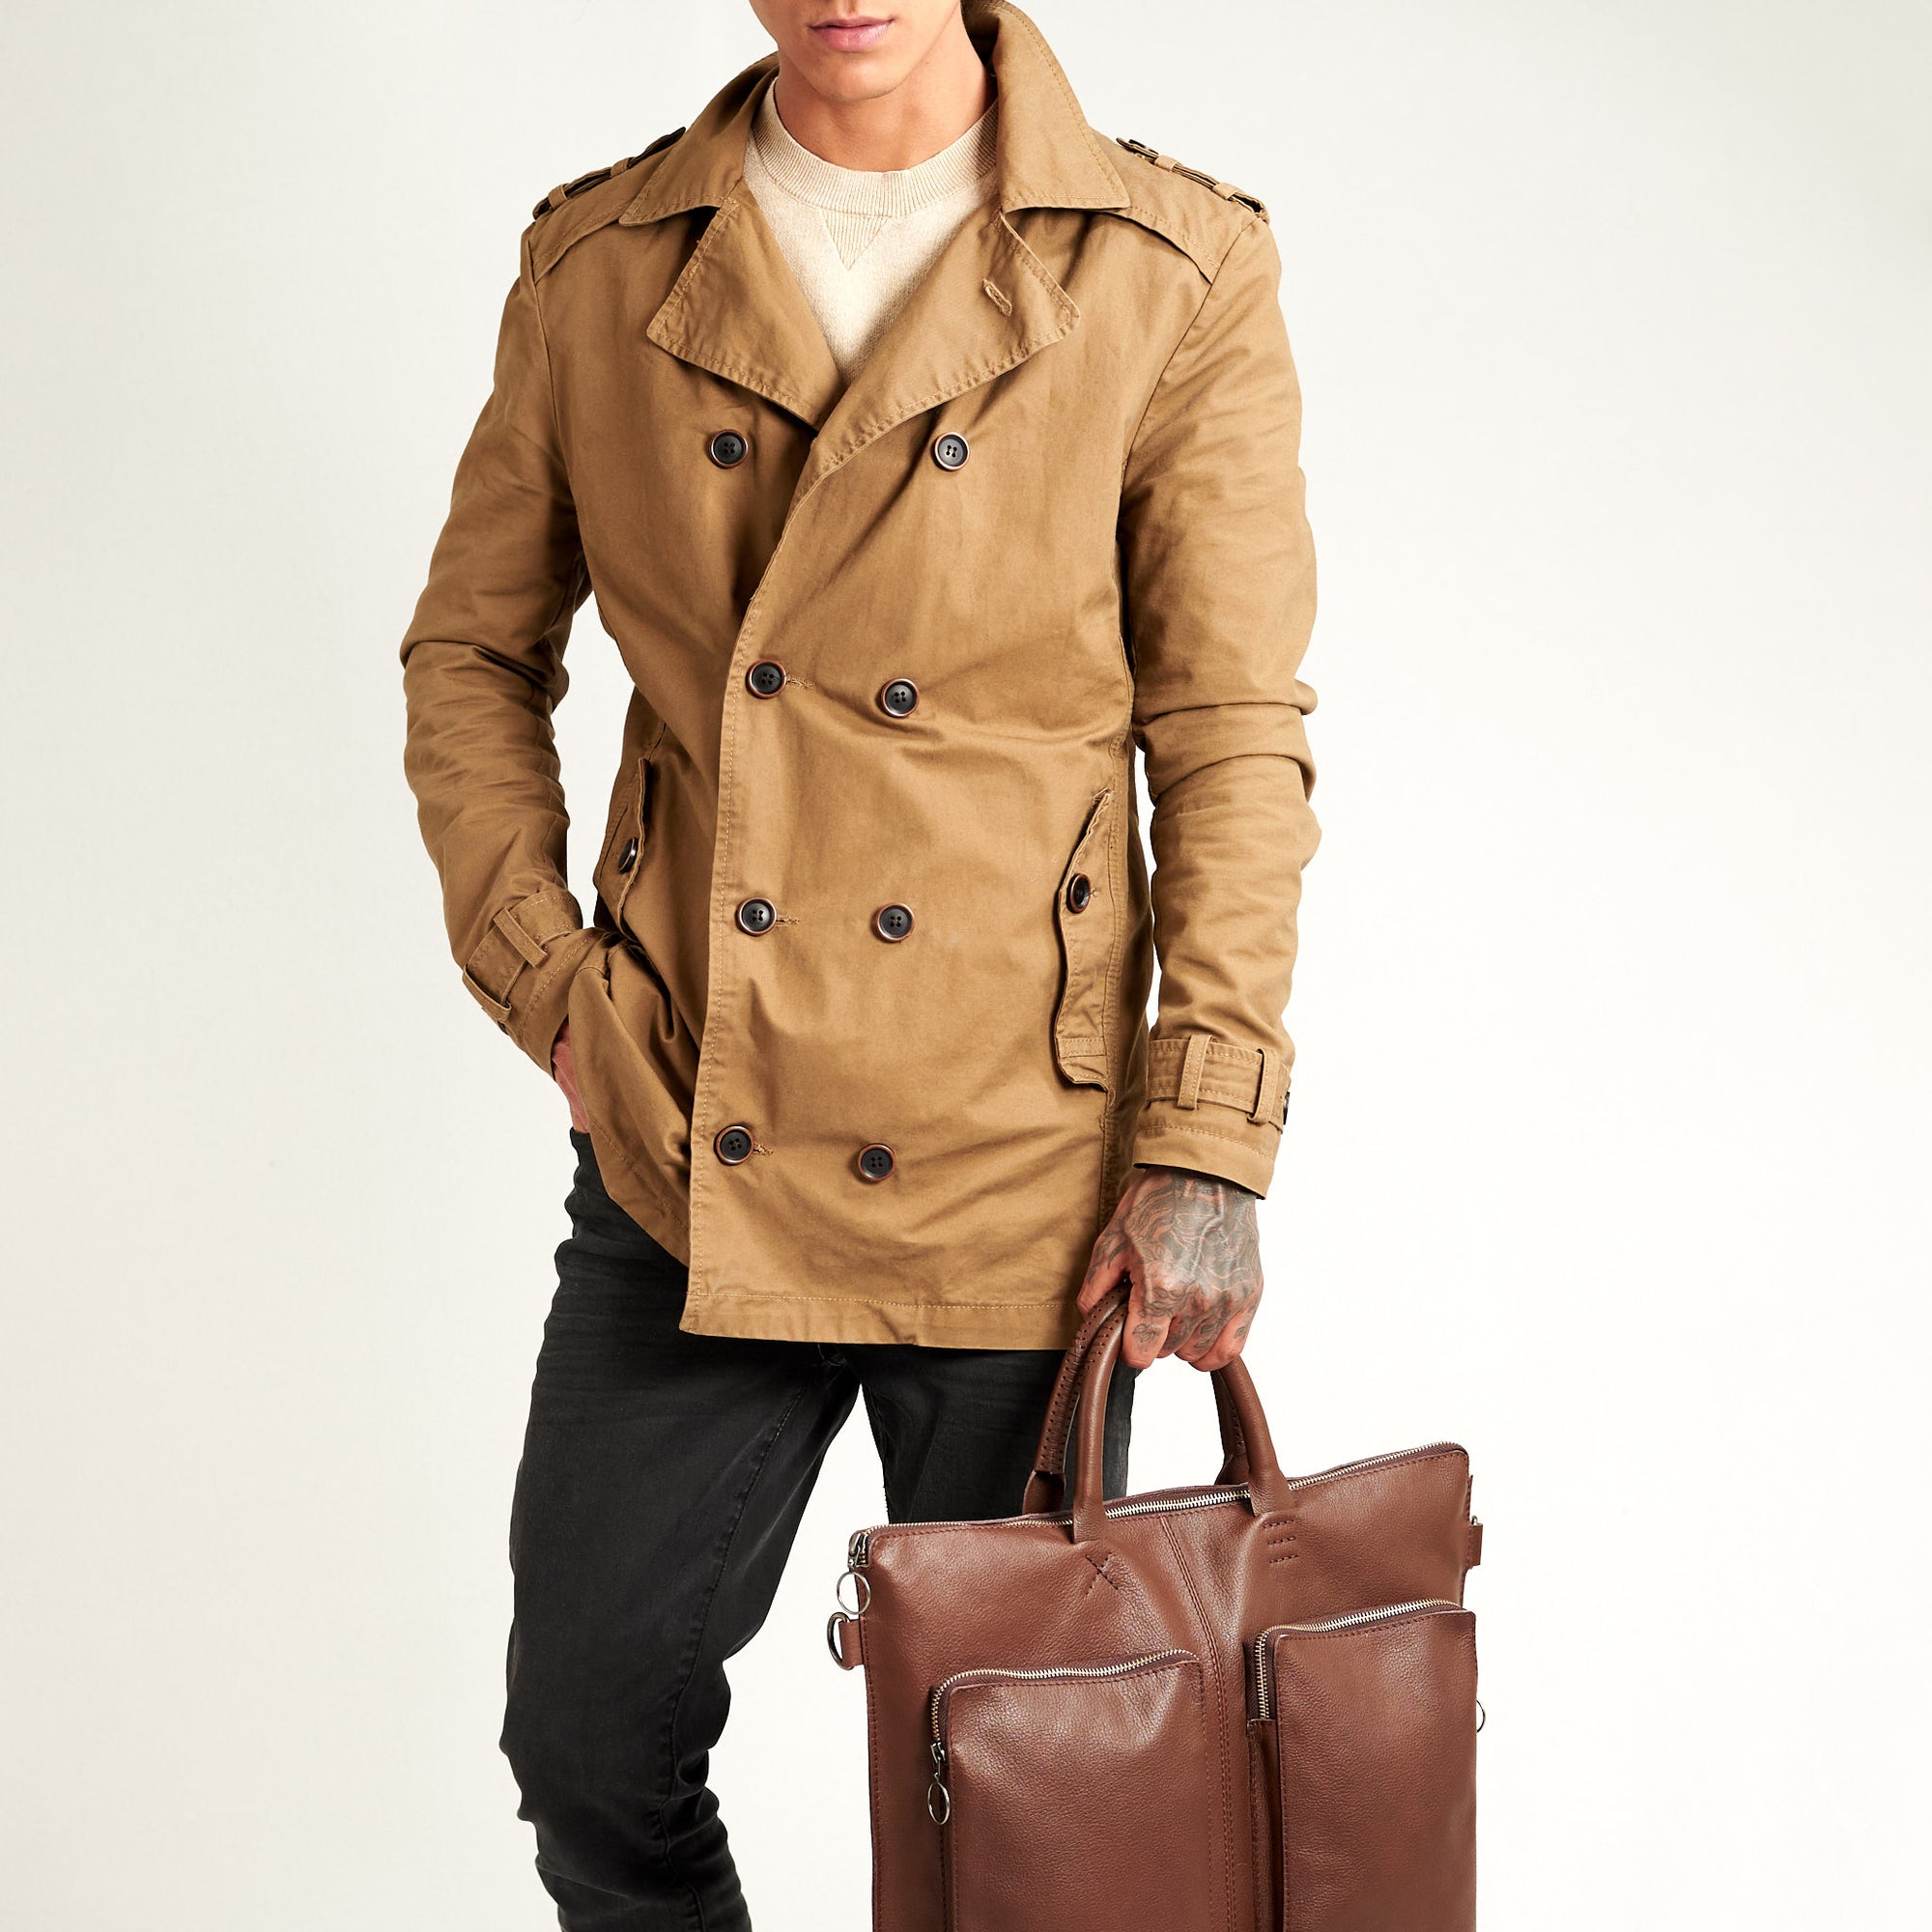 Style model with jacket and tote. Brown tote zipper bag by Capra Leather. Handmade men work bag.